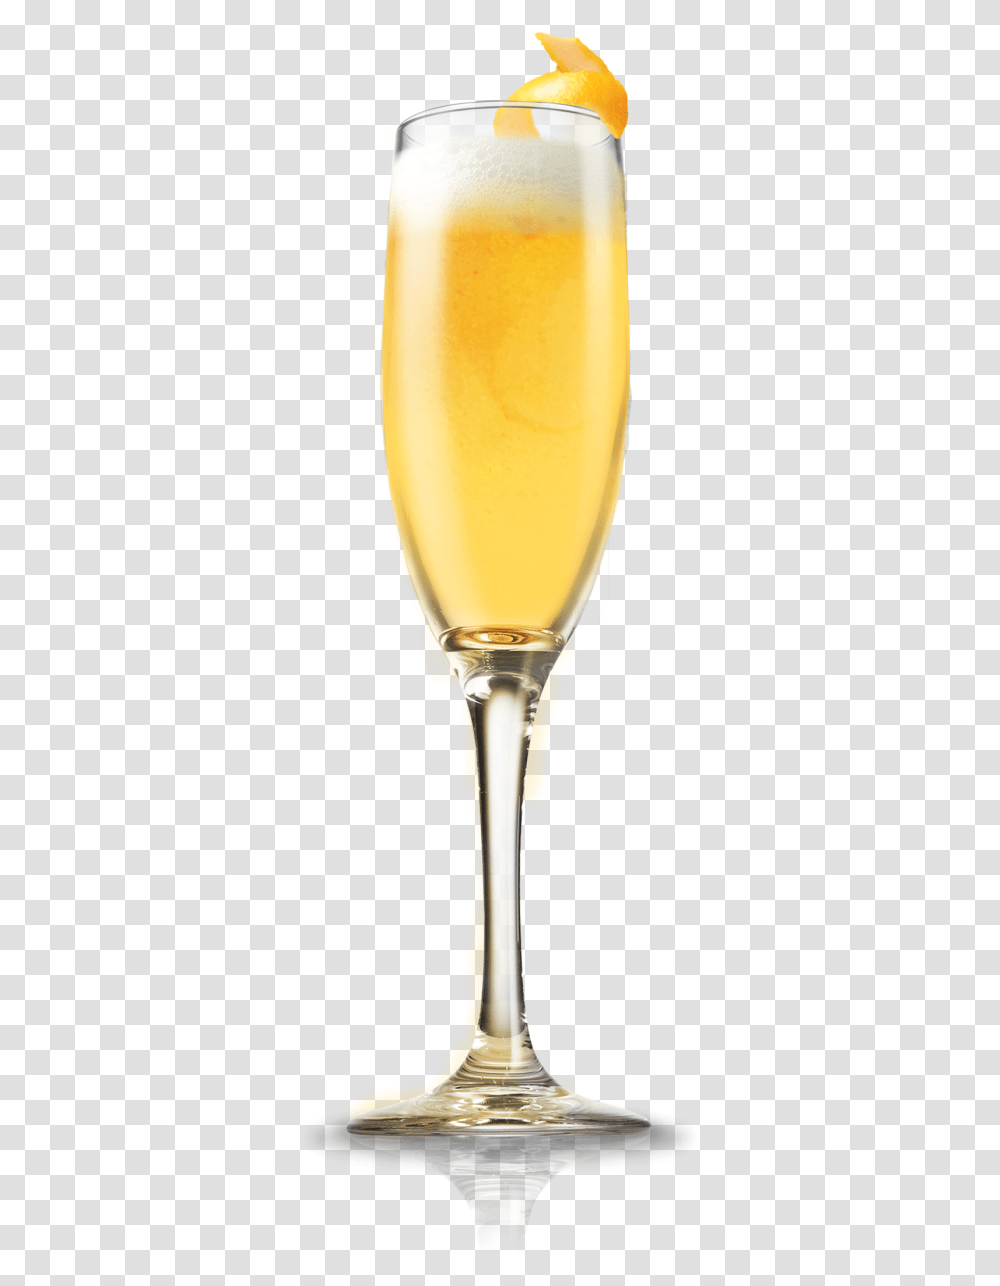 Cocktail Image Mimosa, Lamp, Glass, Beer, Alcohol Transparent Png